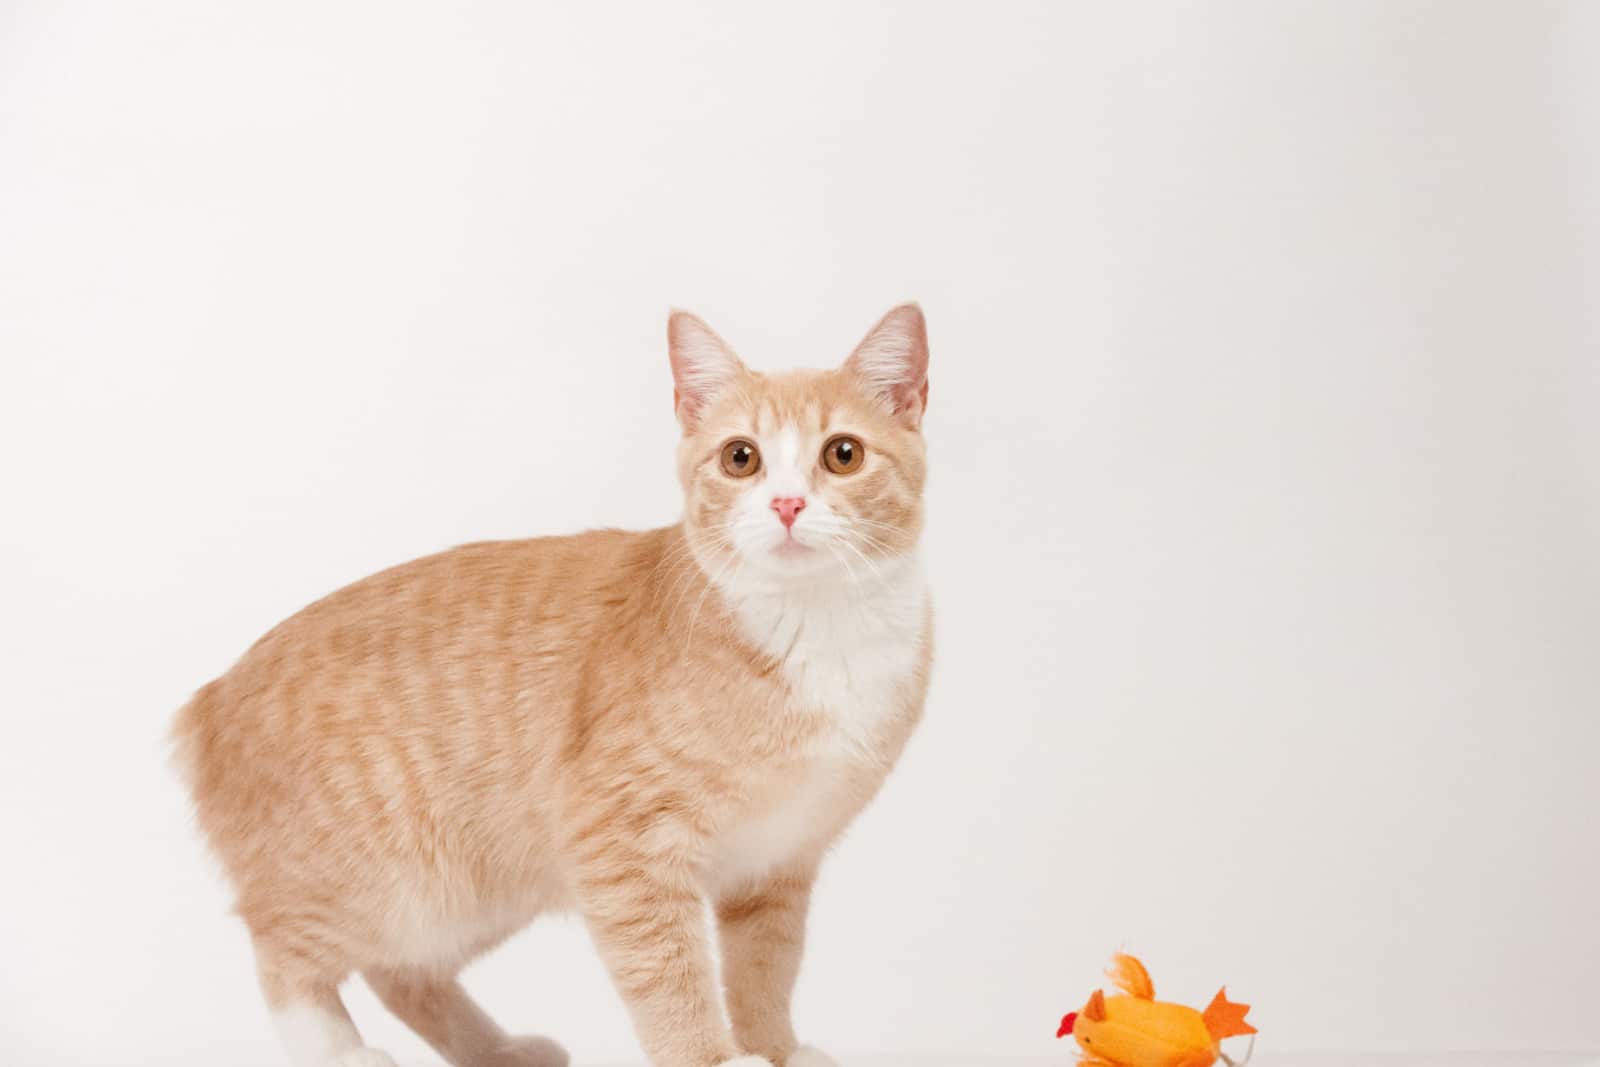 Manx cat standing with orange toy in studio with white background